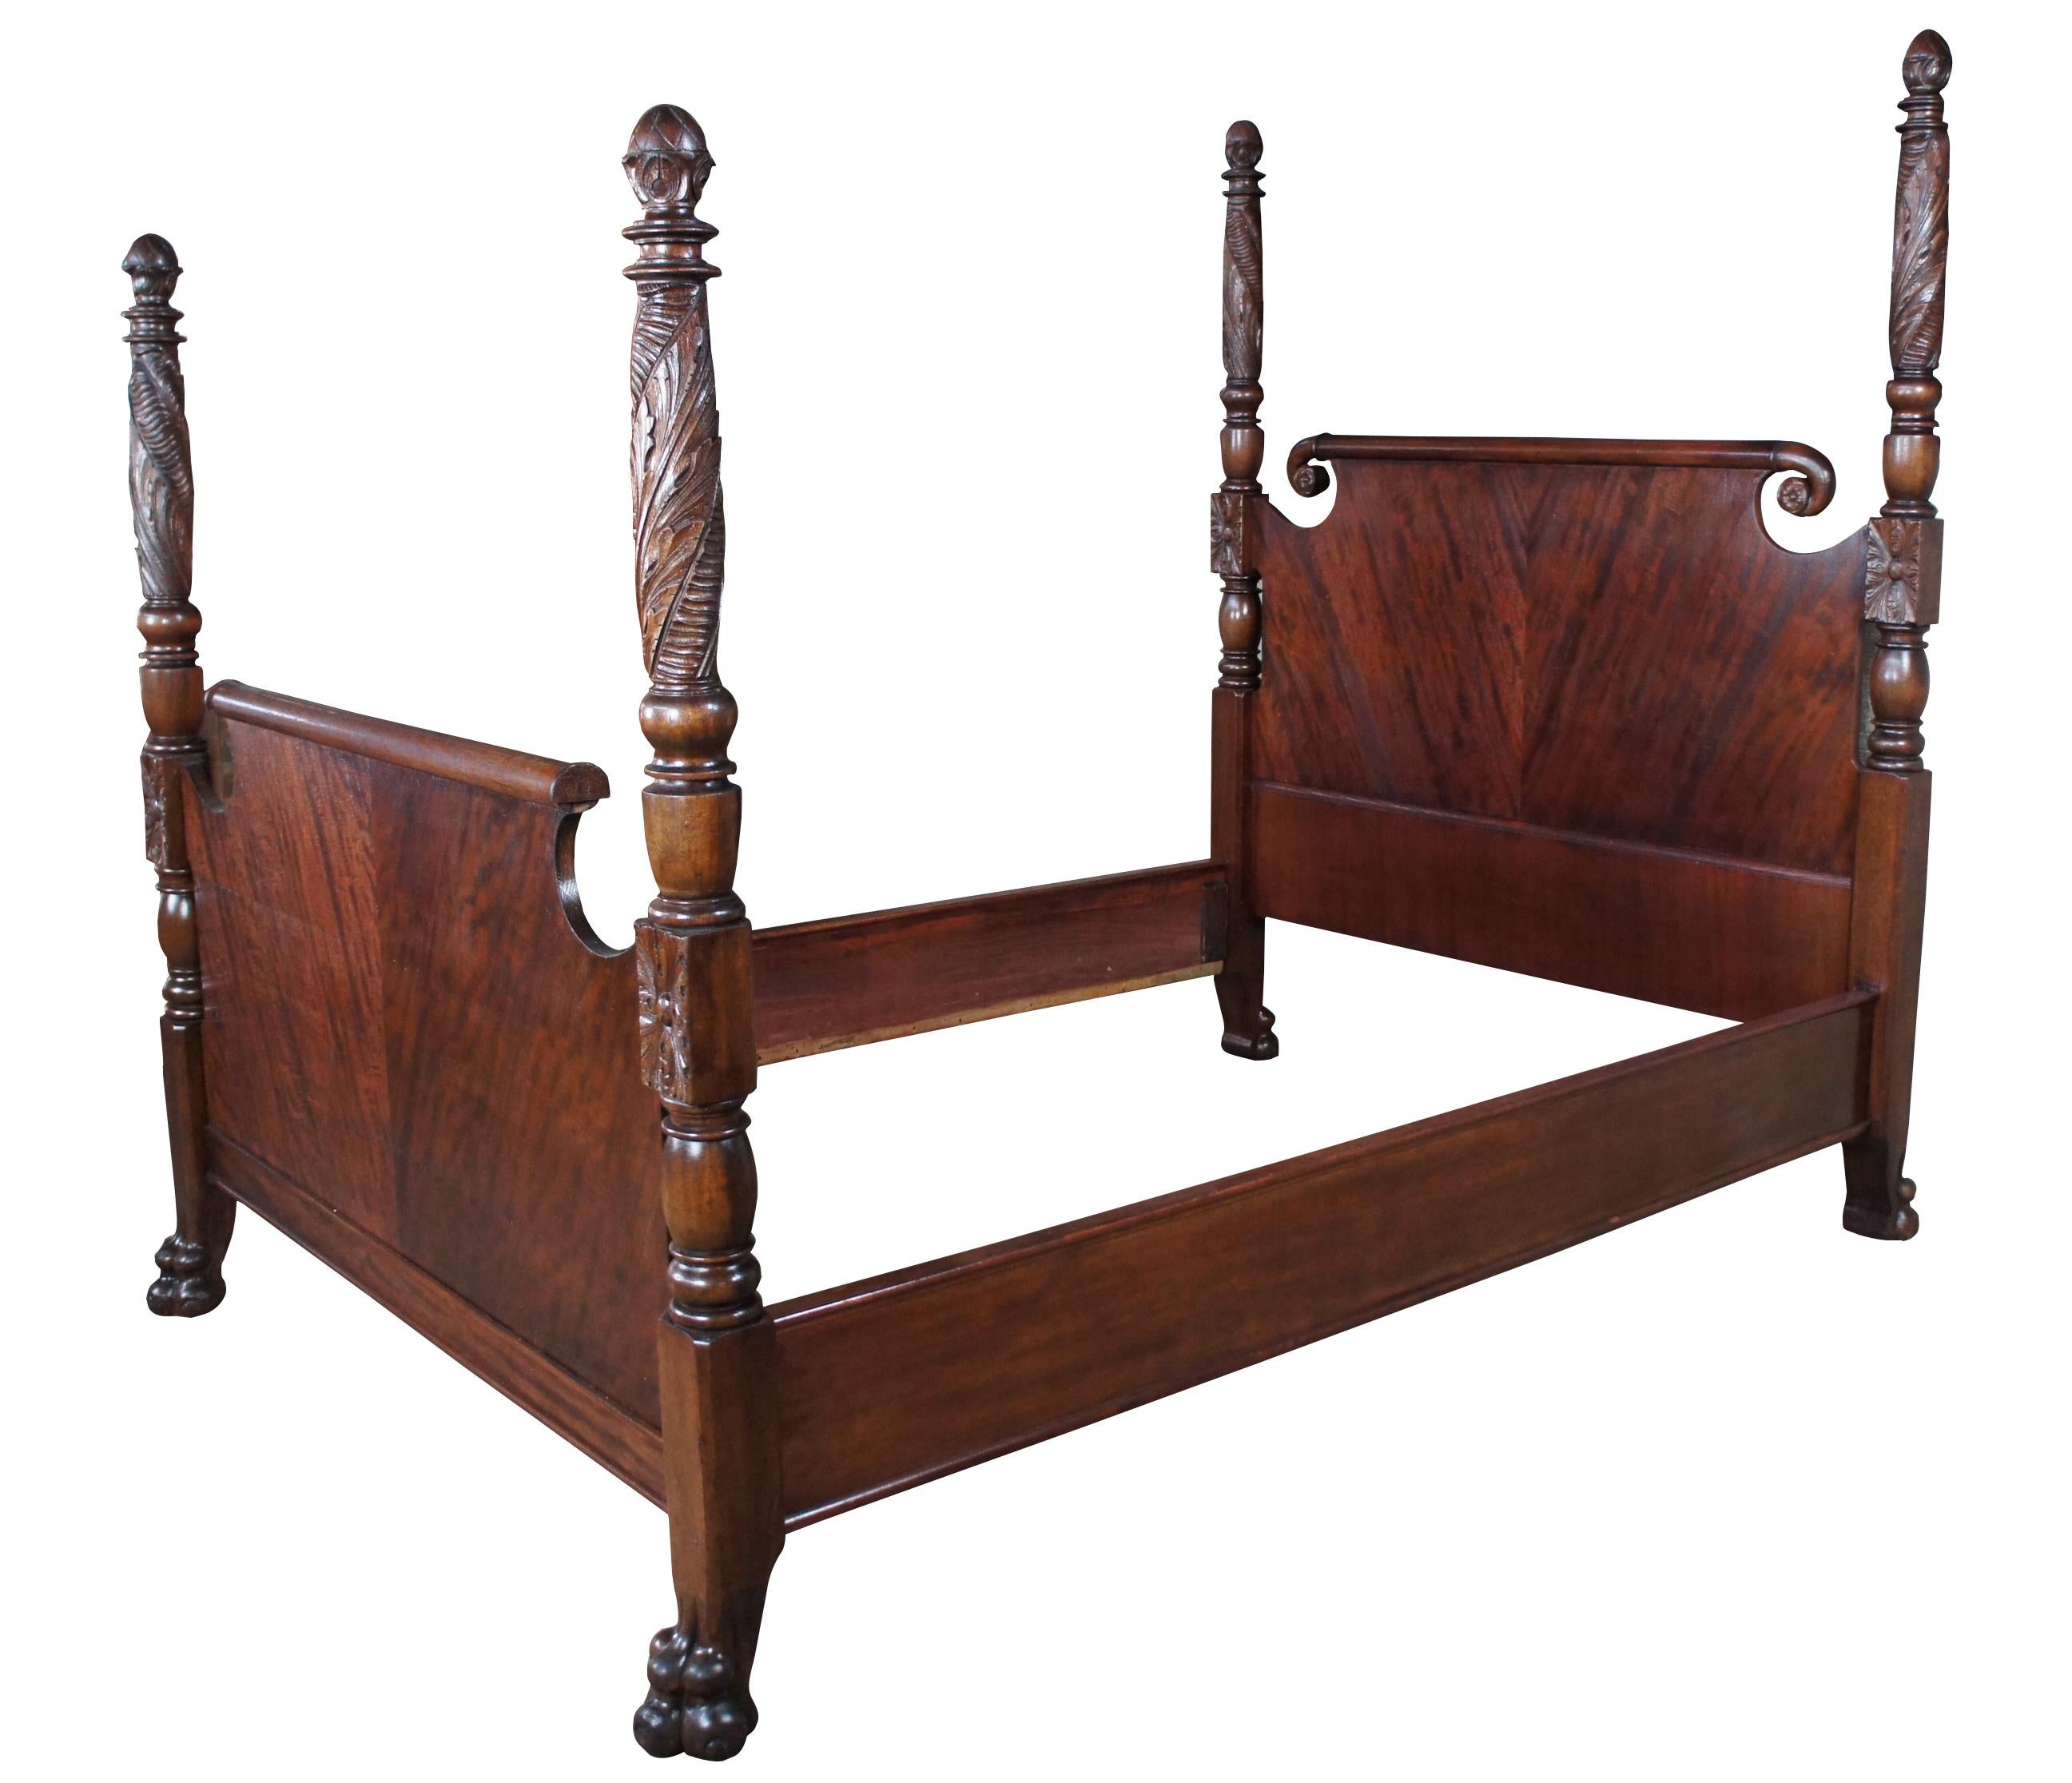 Antique American Empire 4 post full size bed frame, circa 1840s. Made from rich mahogany with a beautiful matchbook 